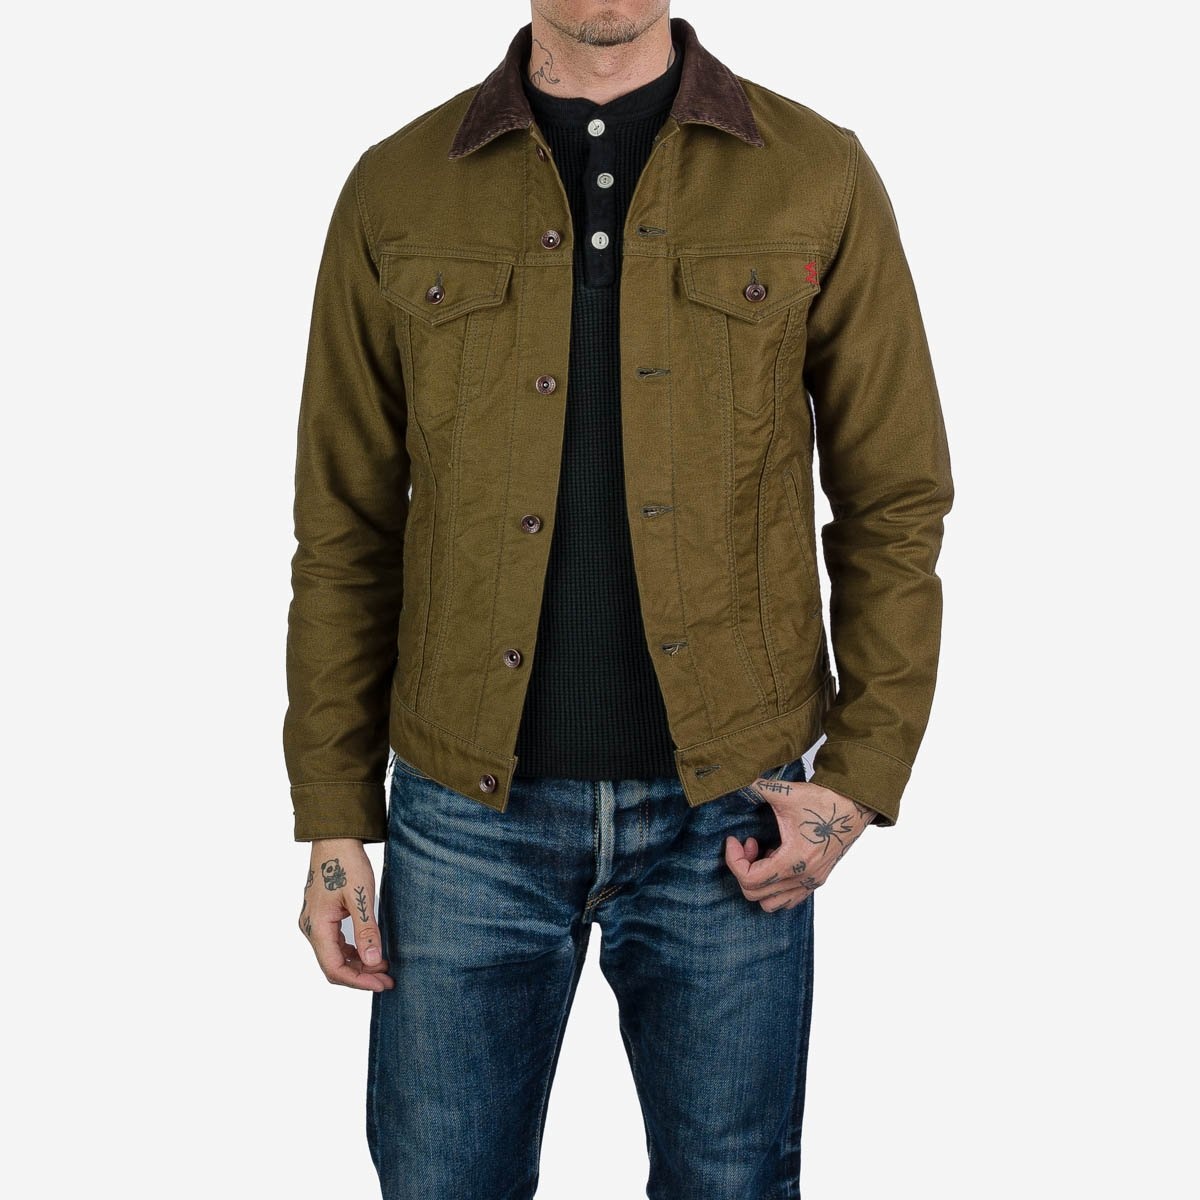 IH-526-ODG 12oz Whipcord Modified Type III Jacket - Olive Drab Green - 2